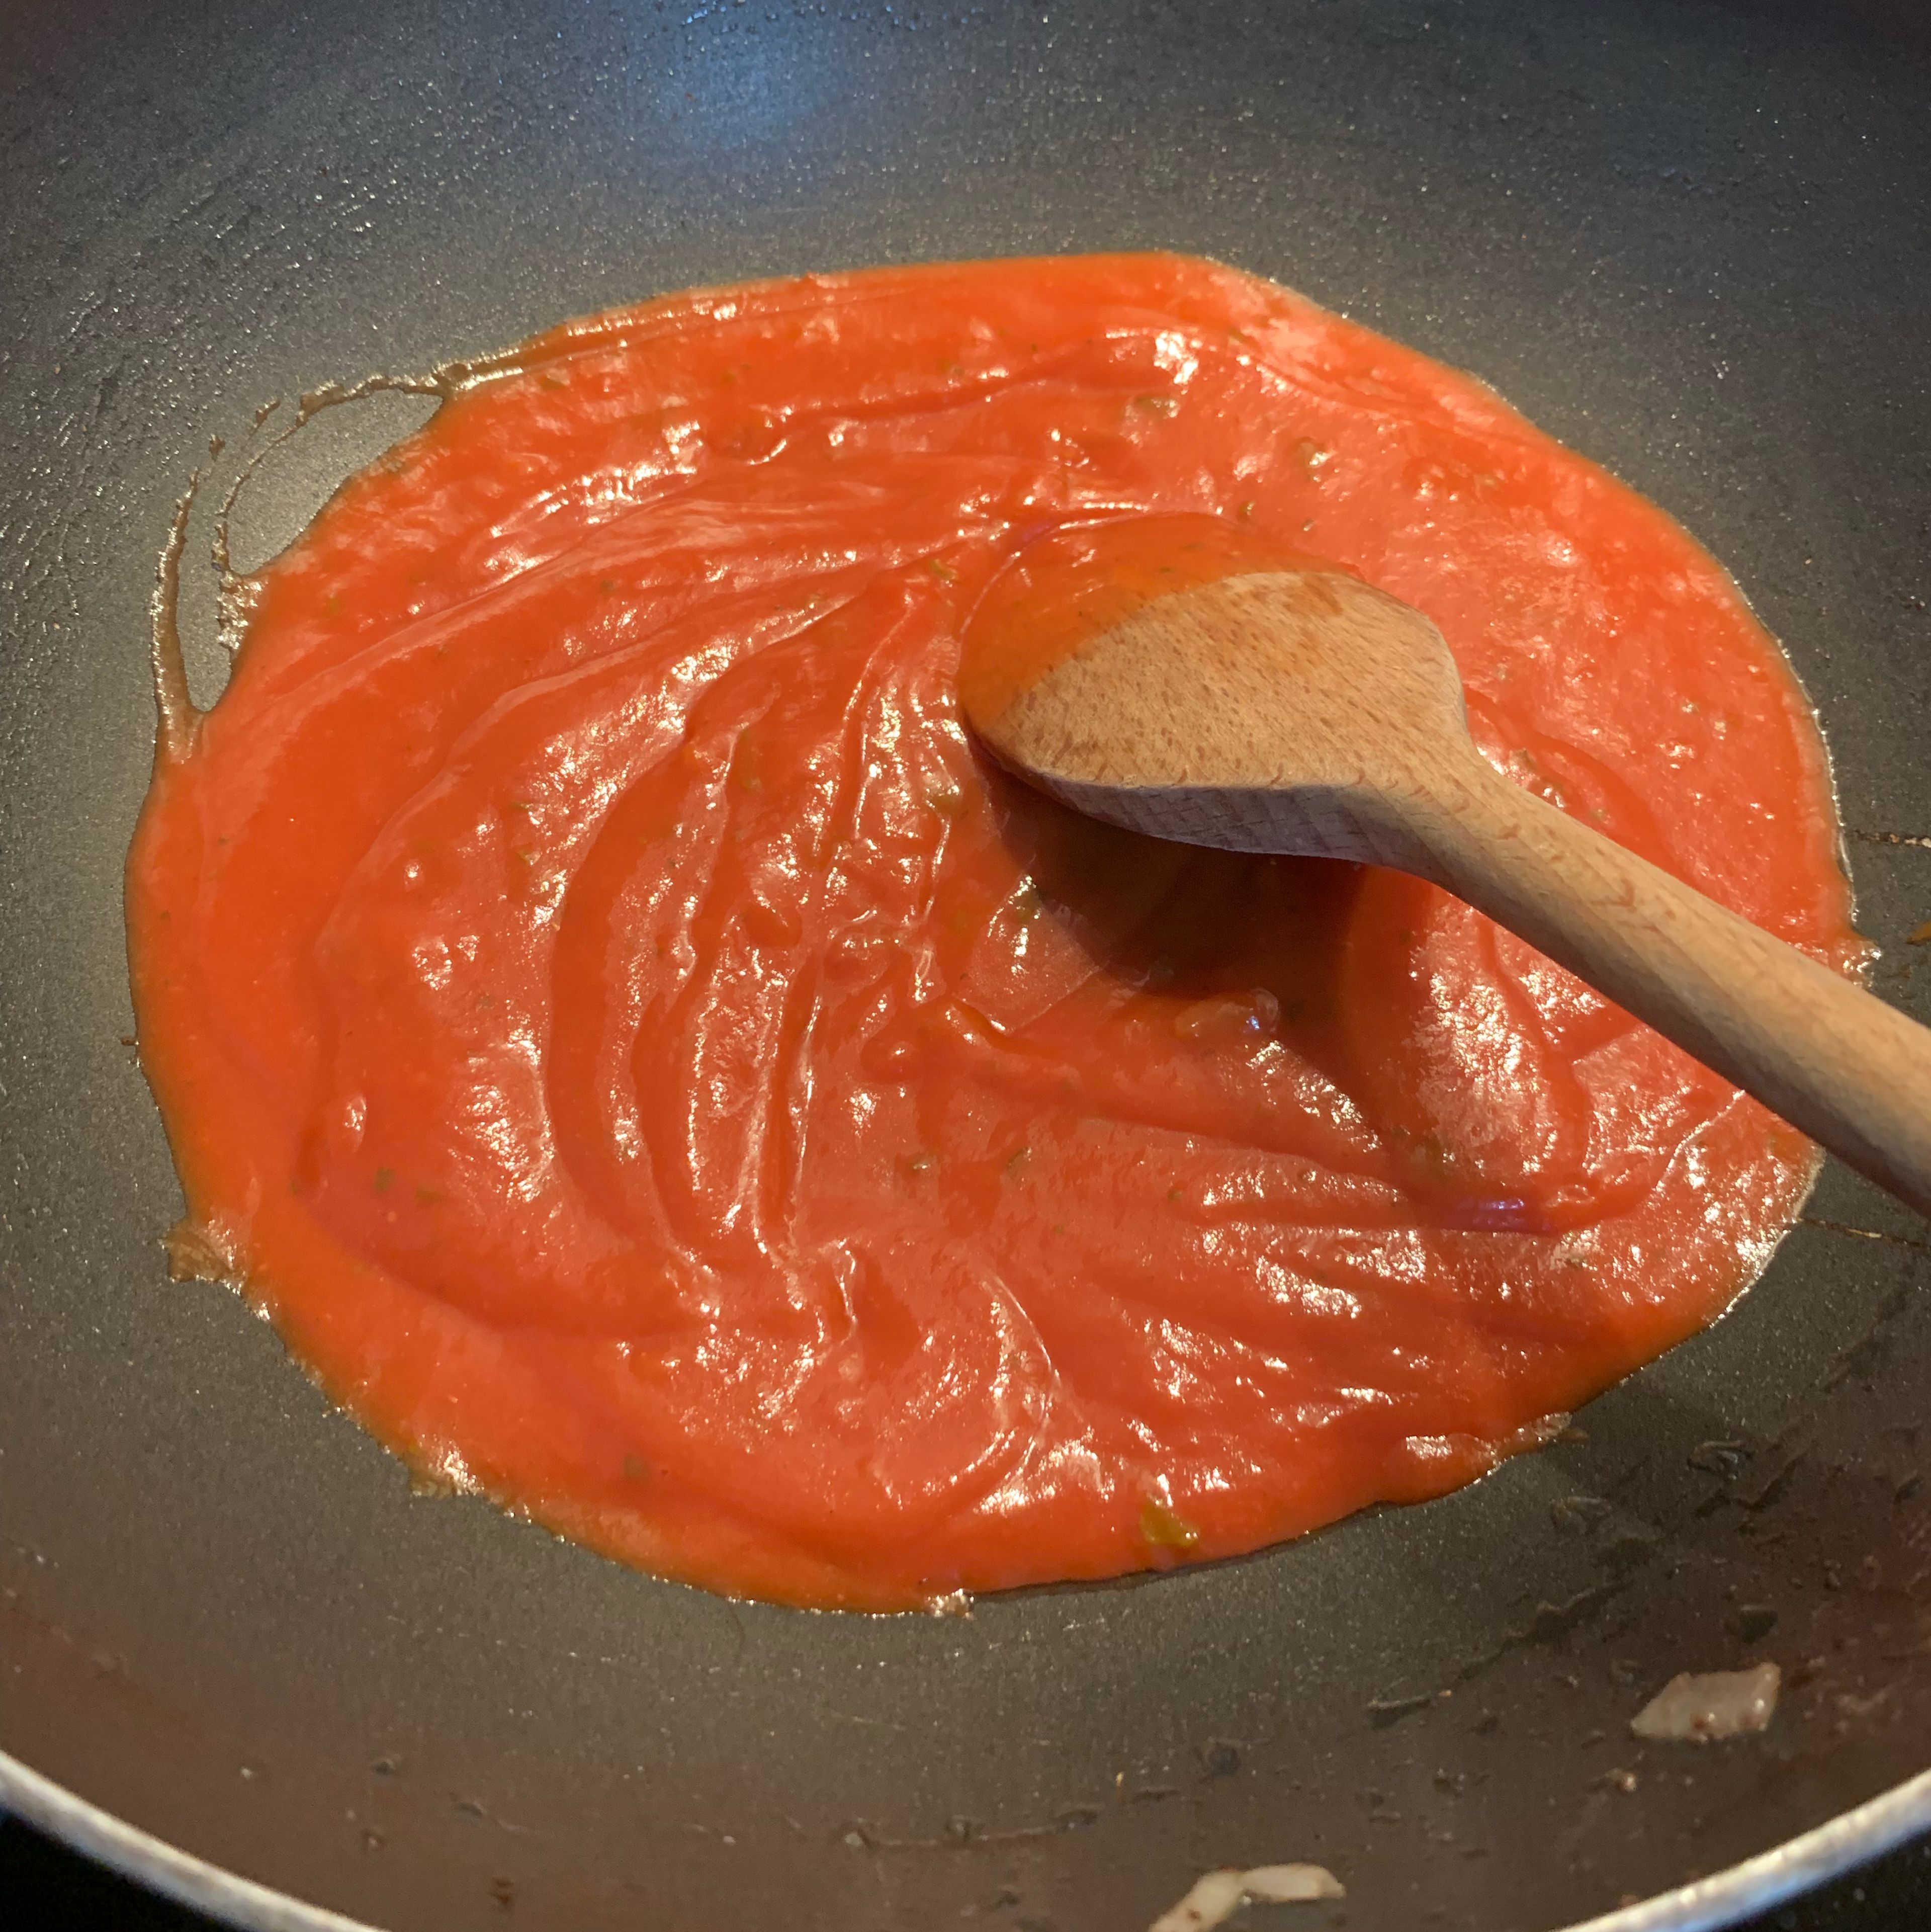 Get the Dolmio sauce out and put in the pan - cook till piping hot. I used the Dolmio cheese and tomato sauce which just works perfect for me. While cooking the sauce add the grated cheese and stir till smooth. You can also make your own home made sauce e.g. adding chopped tomatoes, milk, melted butter, grated Parmesan cheese and flour together.